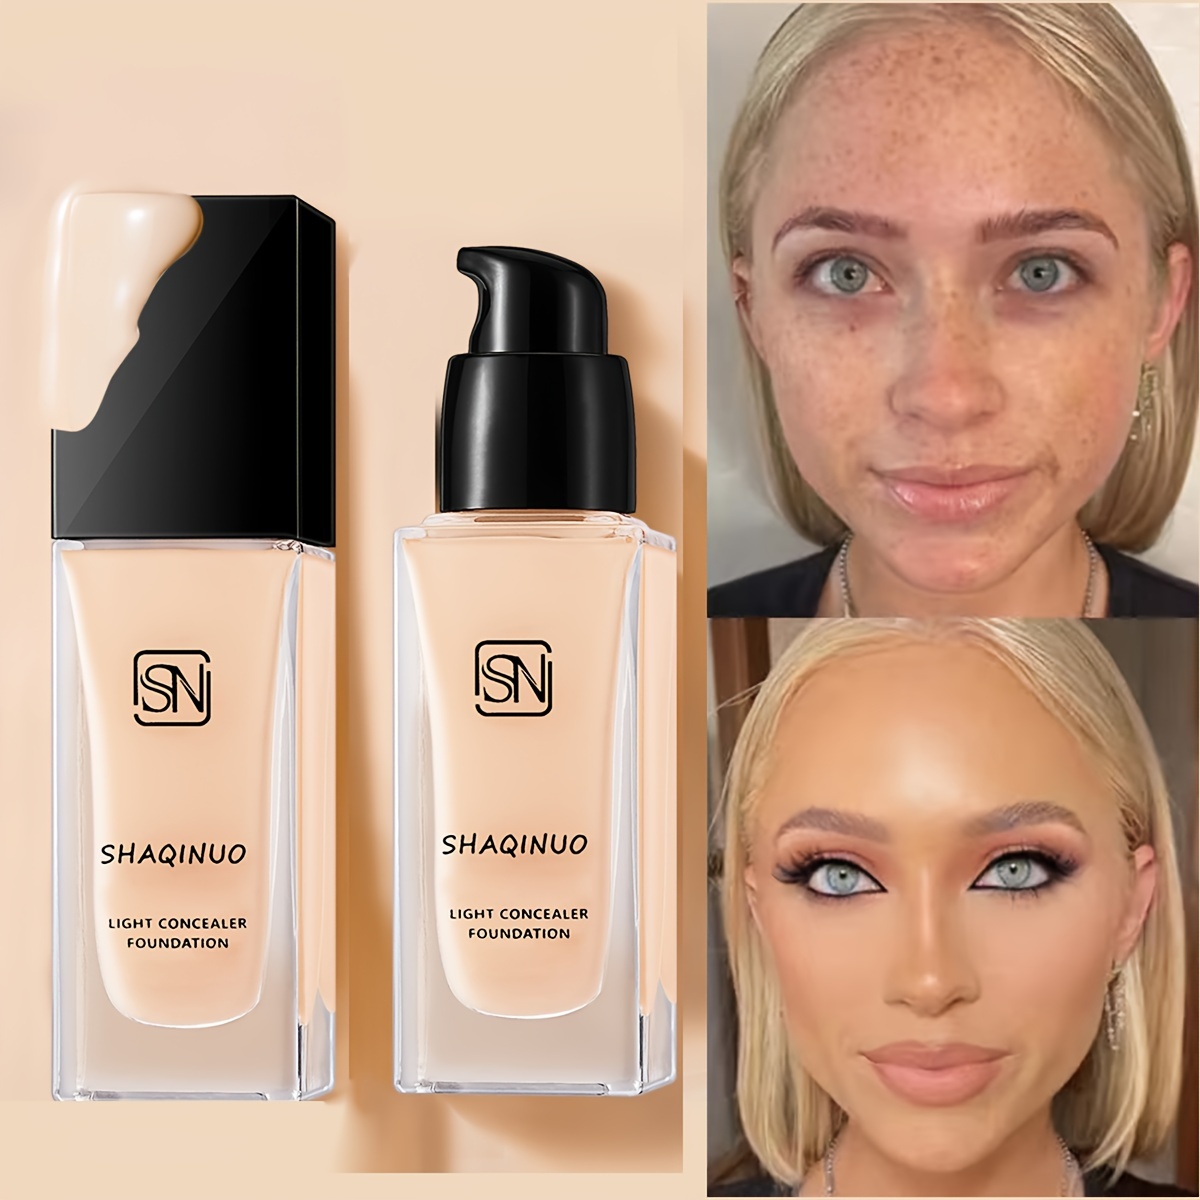 

Light Concealer Foundation, Natural Hydrating Long-lasting Waterproof Face Makeup, Bb Cream For Flawless Skin Tone Correction, Easy-to-blend Texture